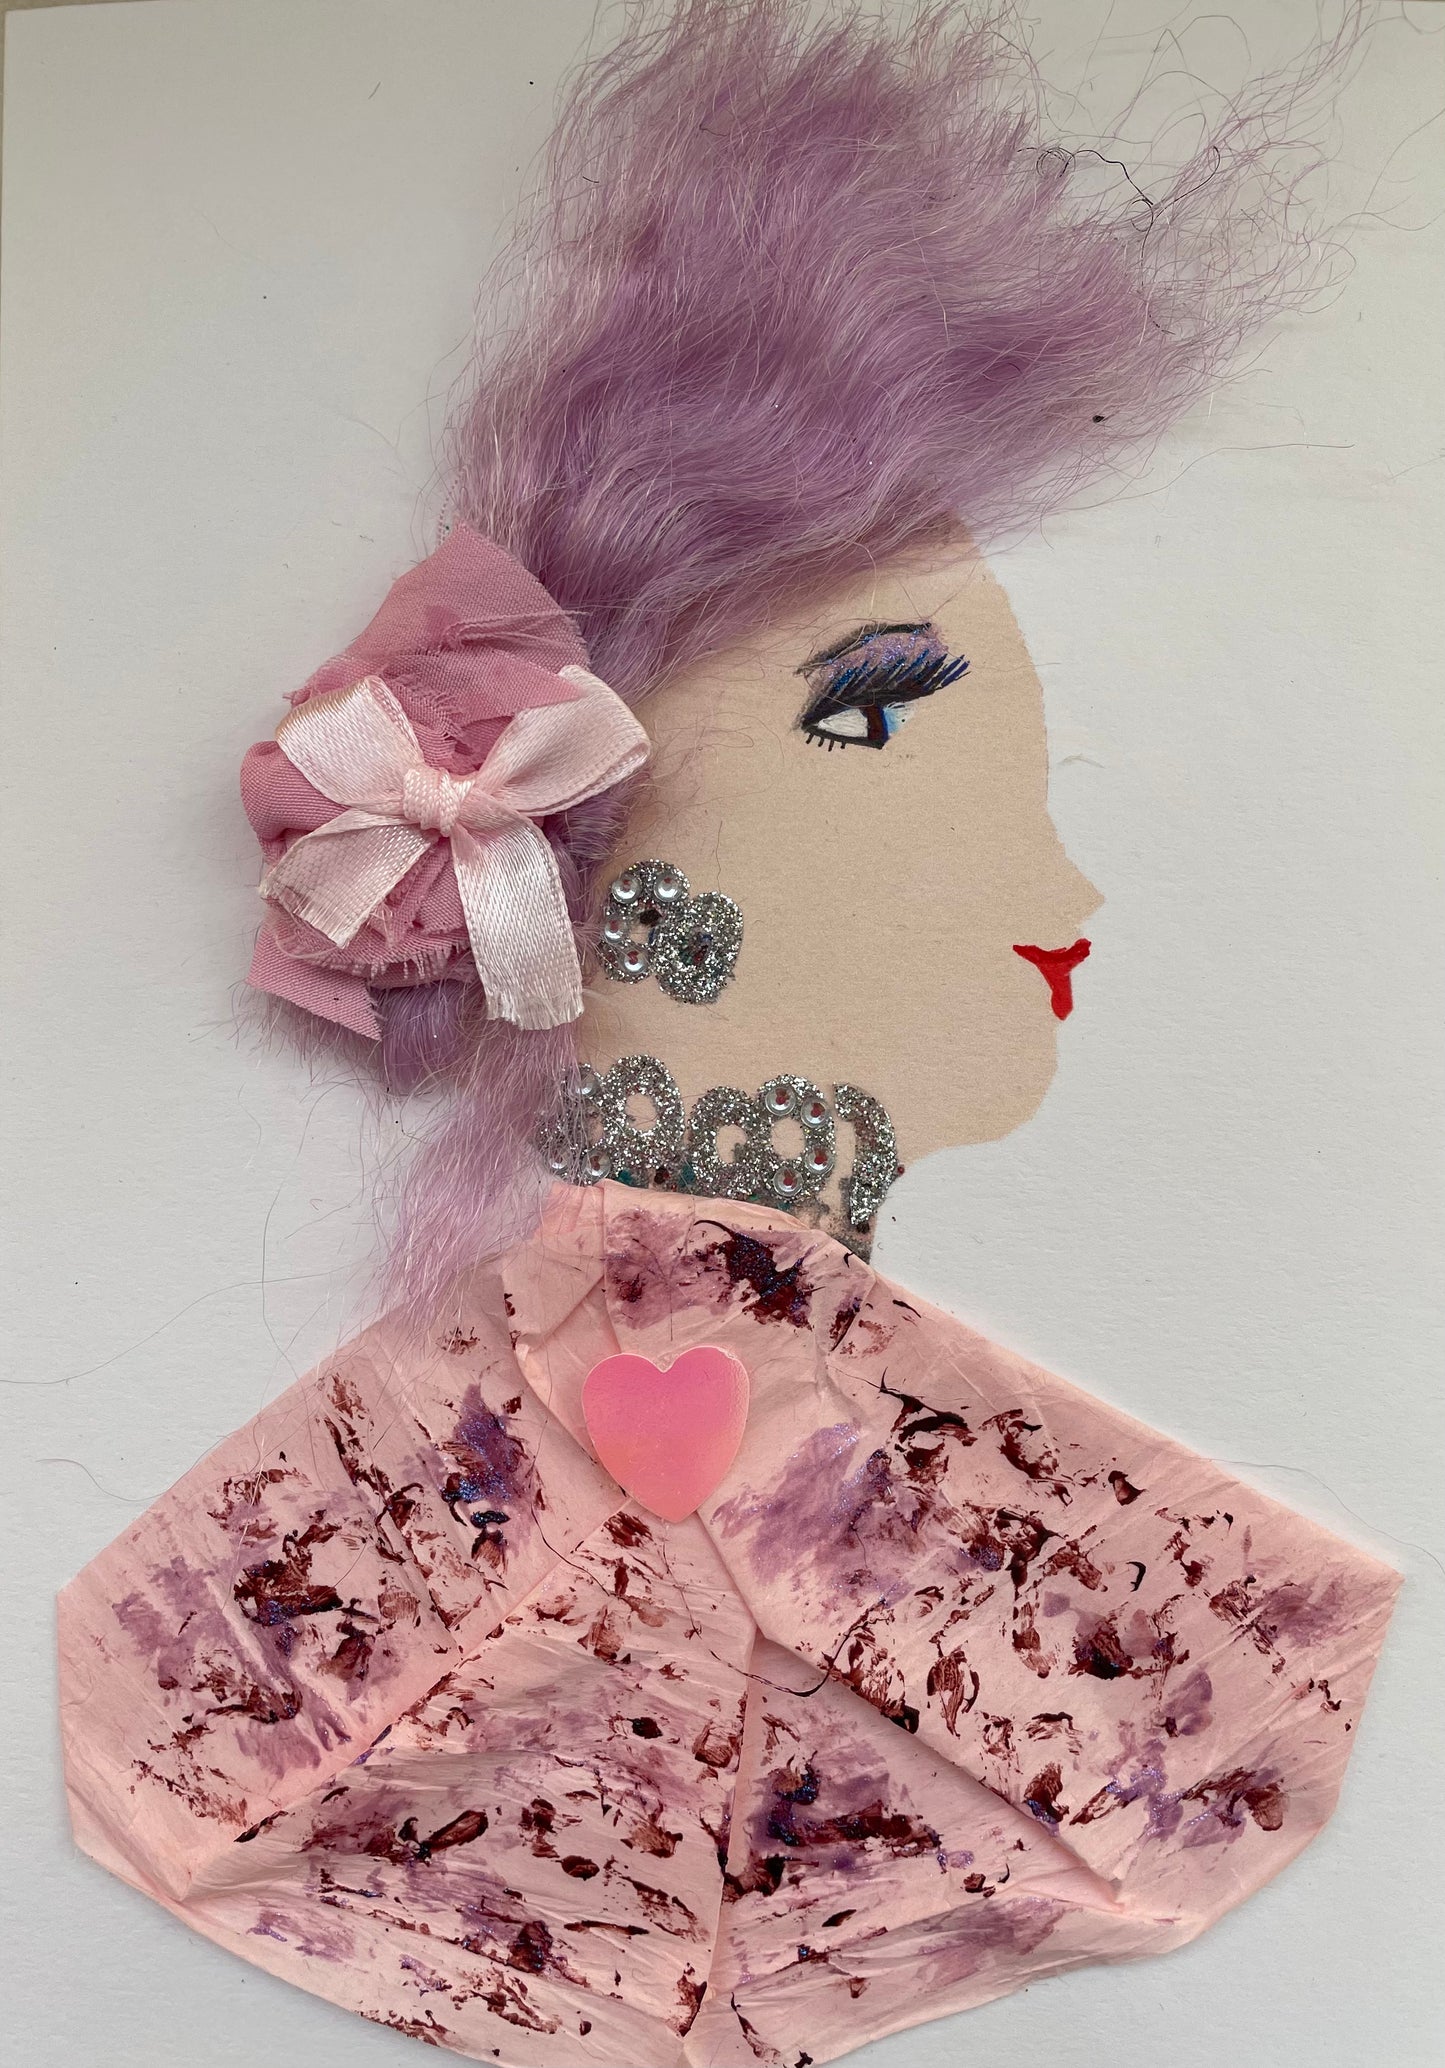 She is wearing a light pink patterned blouse with splashes of purple paired with a matching diamanté necklace and earrings. On her  blouse, there is a hot pink heart jewel attached. She also has gentle lavender coloured hair accompanied by a light pink bow used as an accessory. A beautiful card  to frame for your home or the perfect gift for someone to celebrate. 